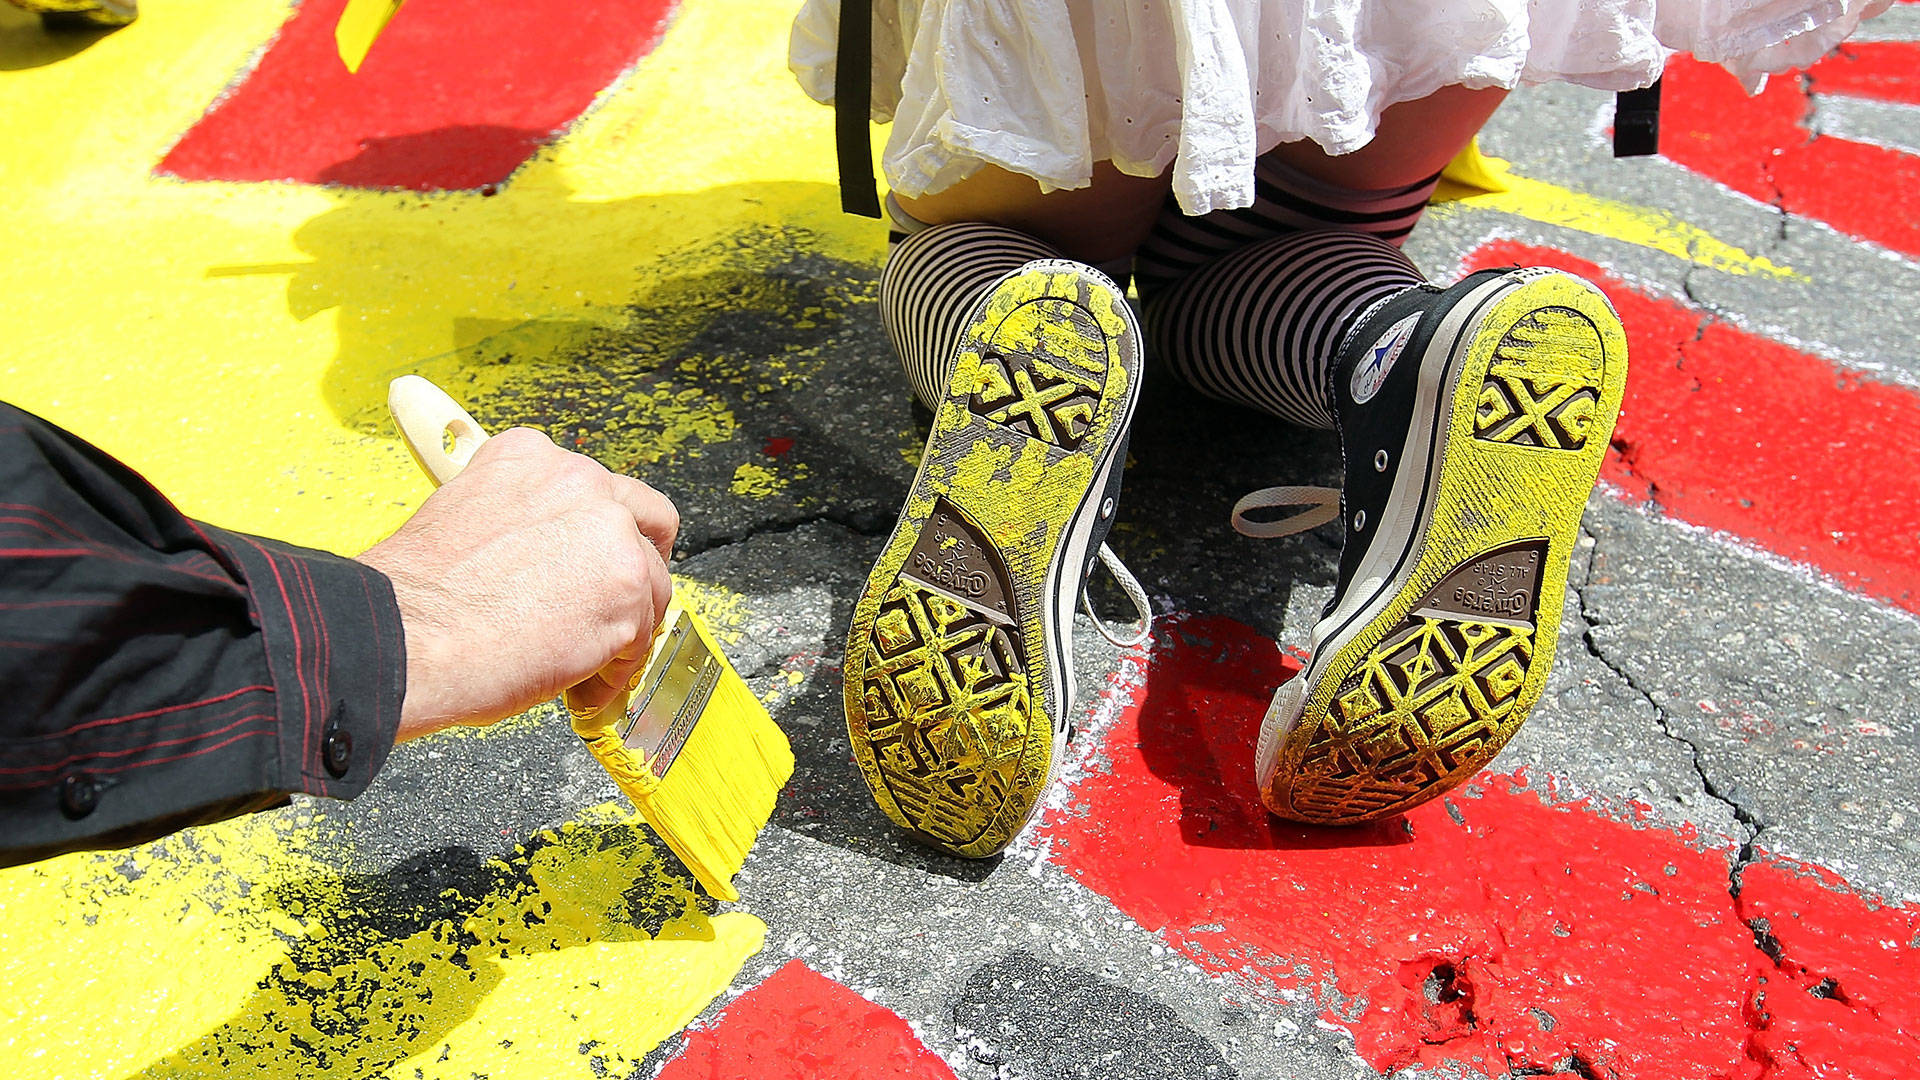 Demonstrators paint a mural on the street at the intersection of Market and Montgomery Streets in San Francisco in 2012. Justin Sullivan/Getty Images